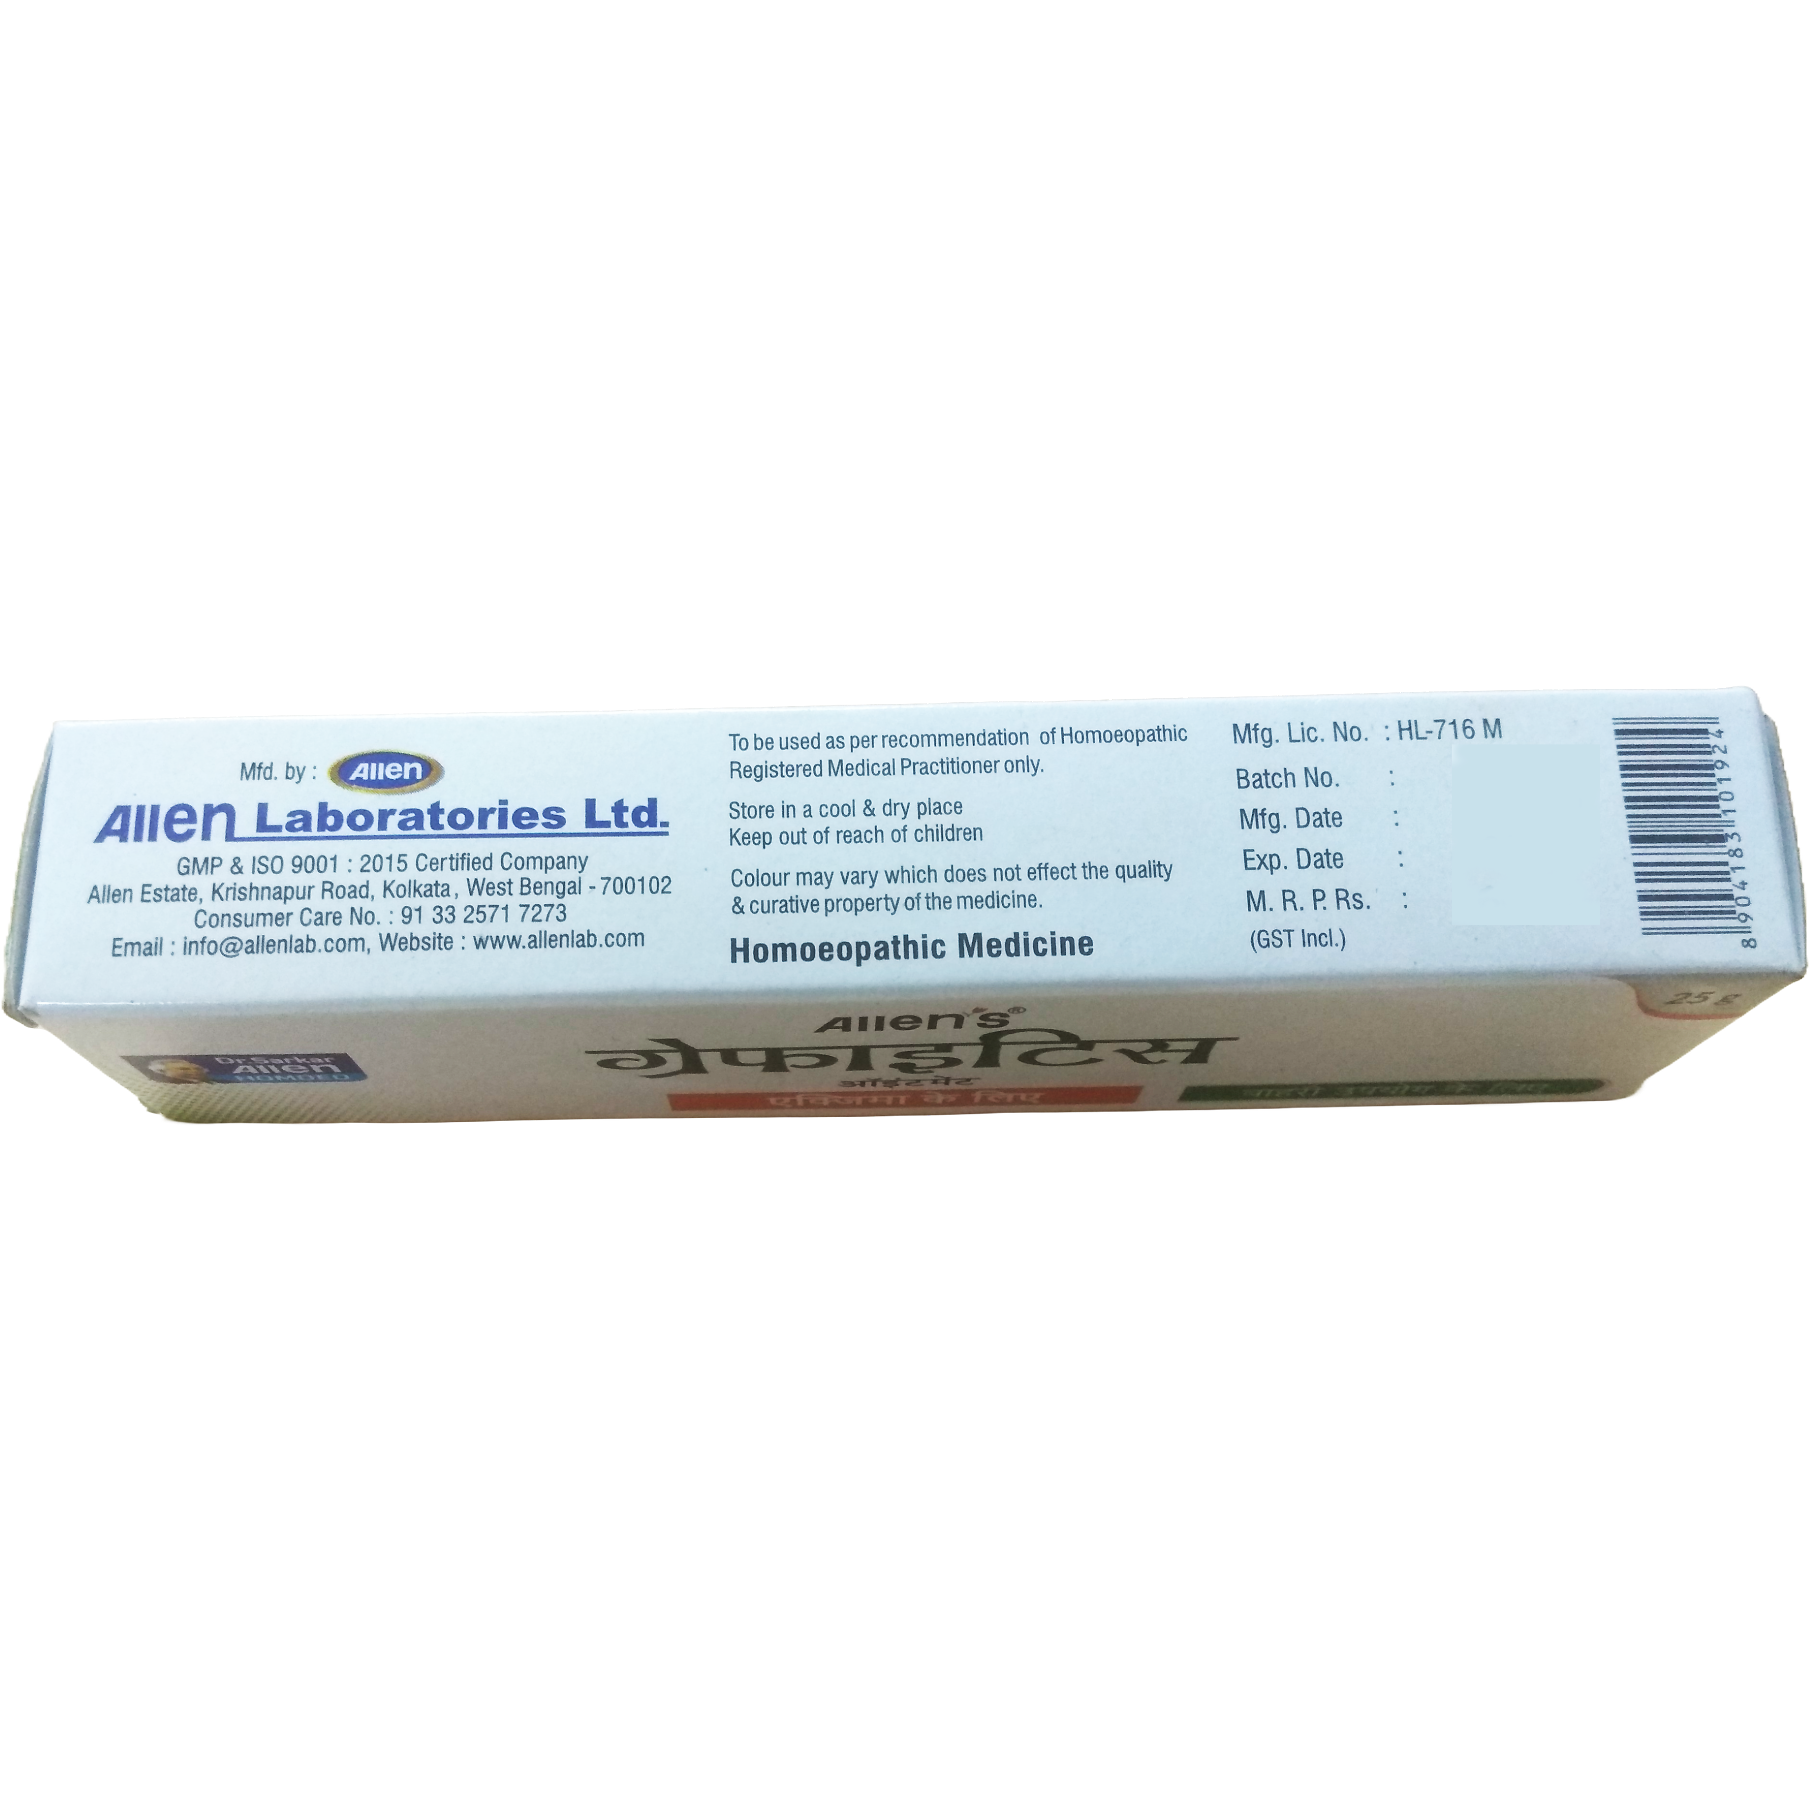 Allen Laboratories Graphitis Ointment 25 gm (Pack of 4)